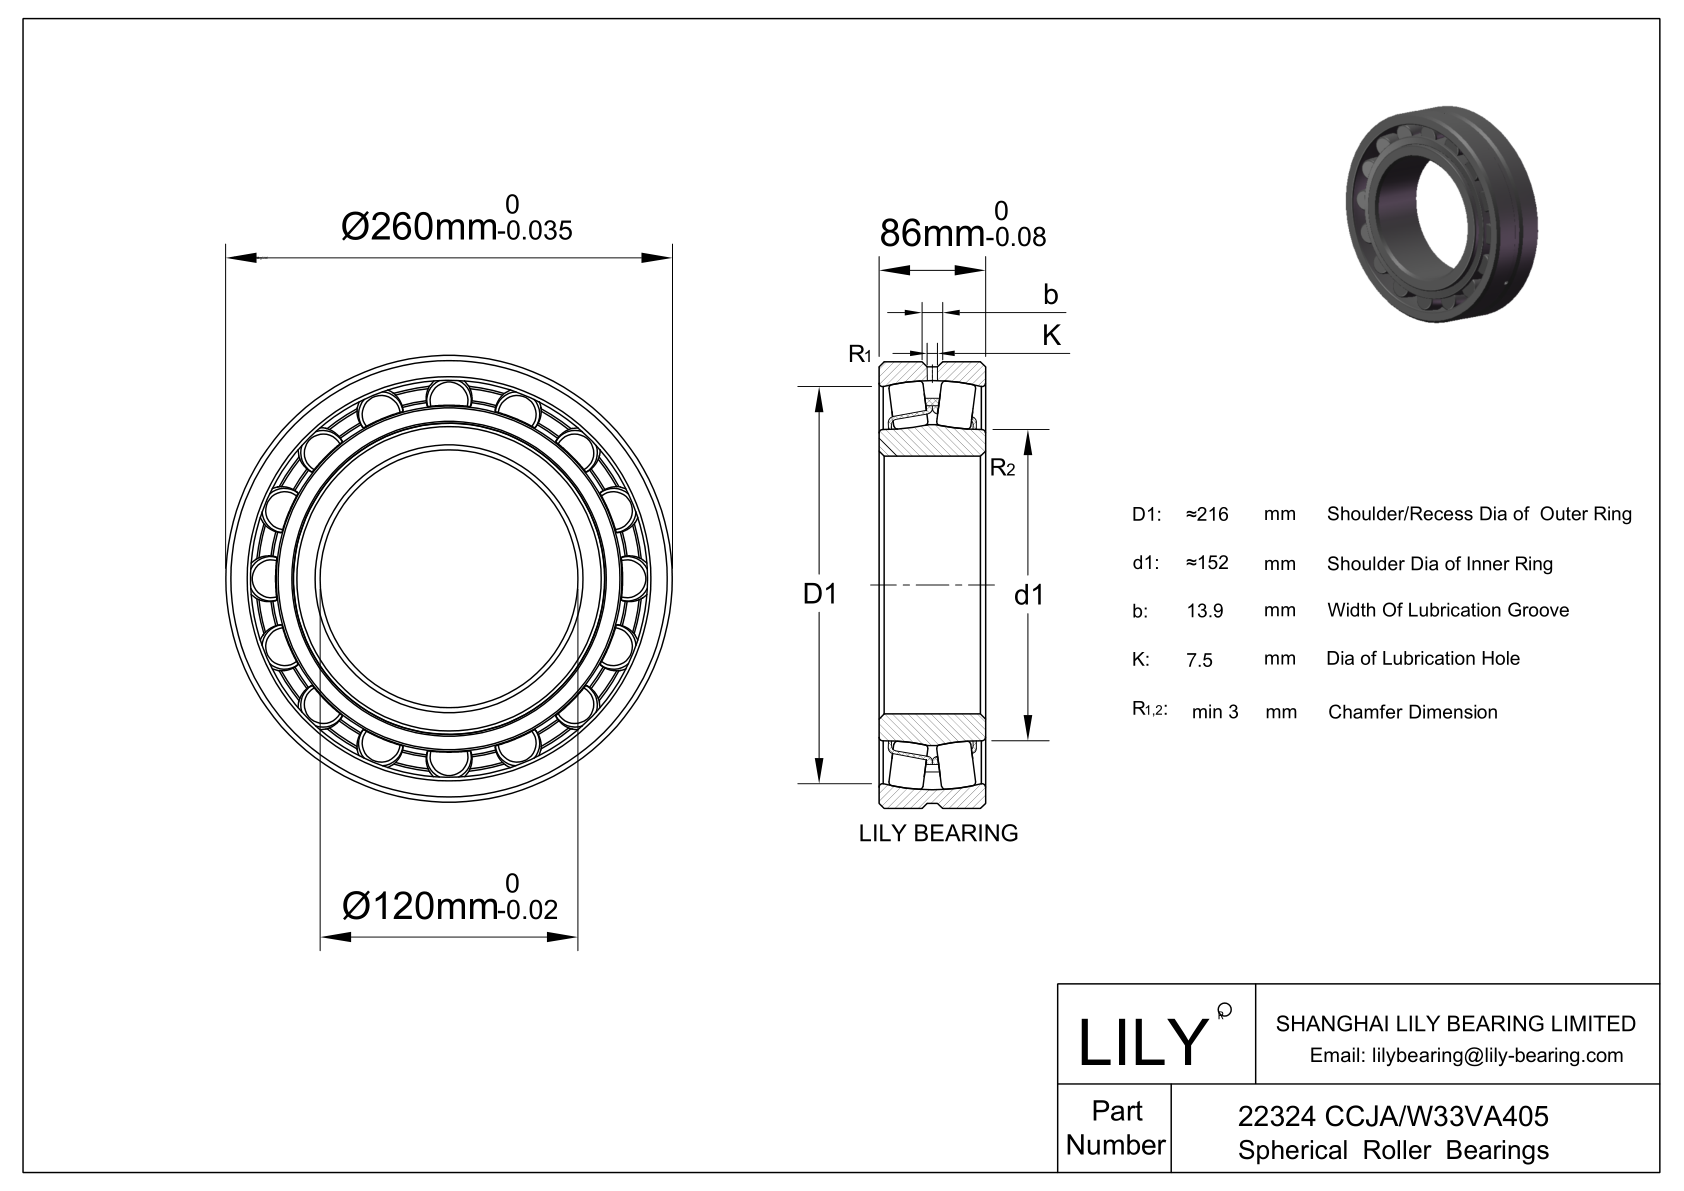 22324 CCJA/W33VA405 Double Row Spherical Roller Bearing cad drawing